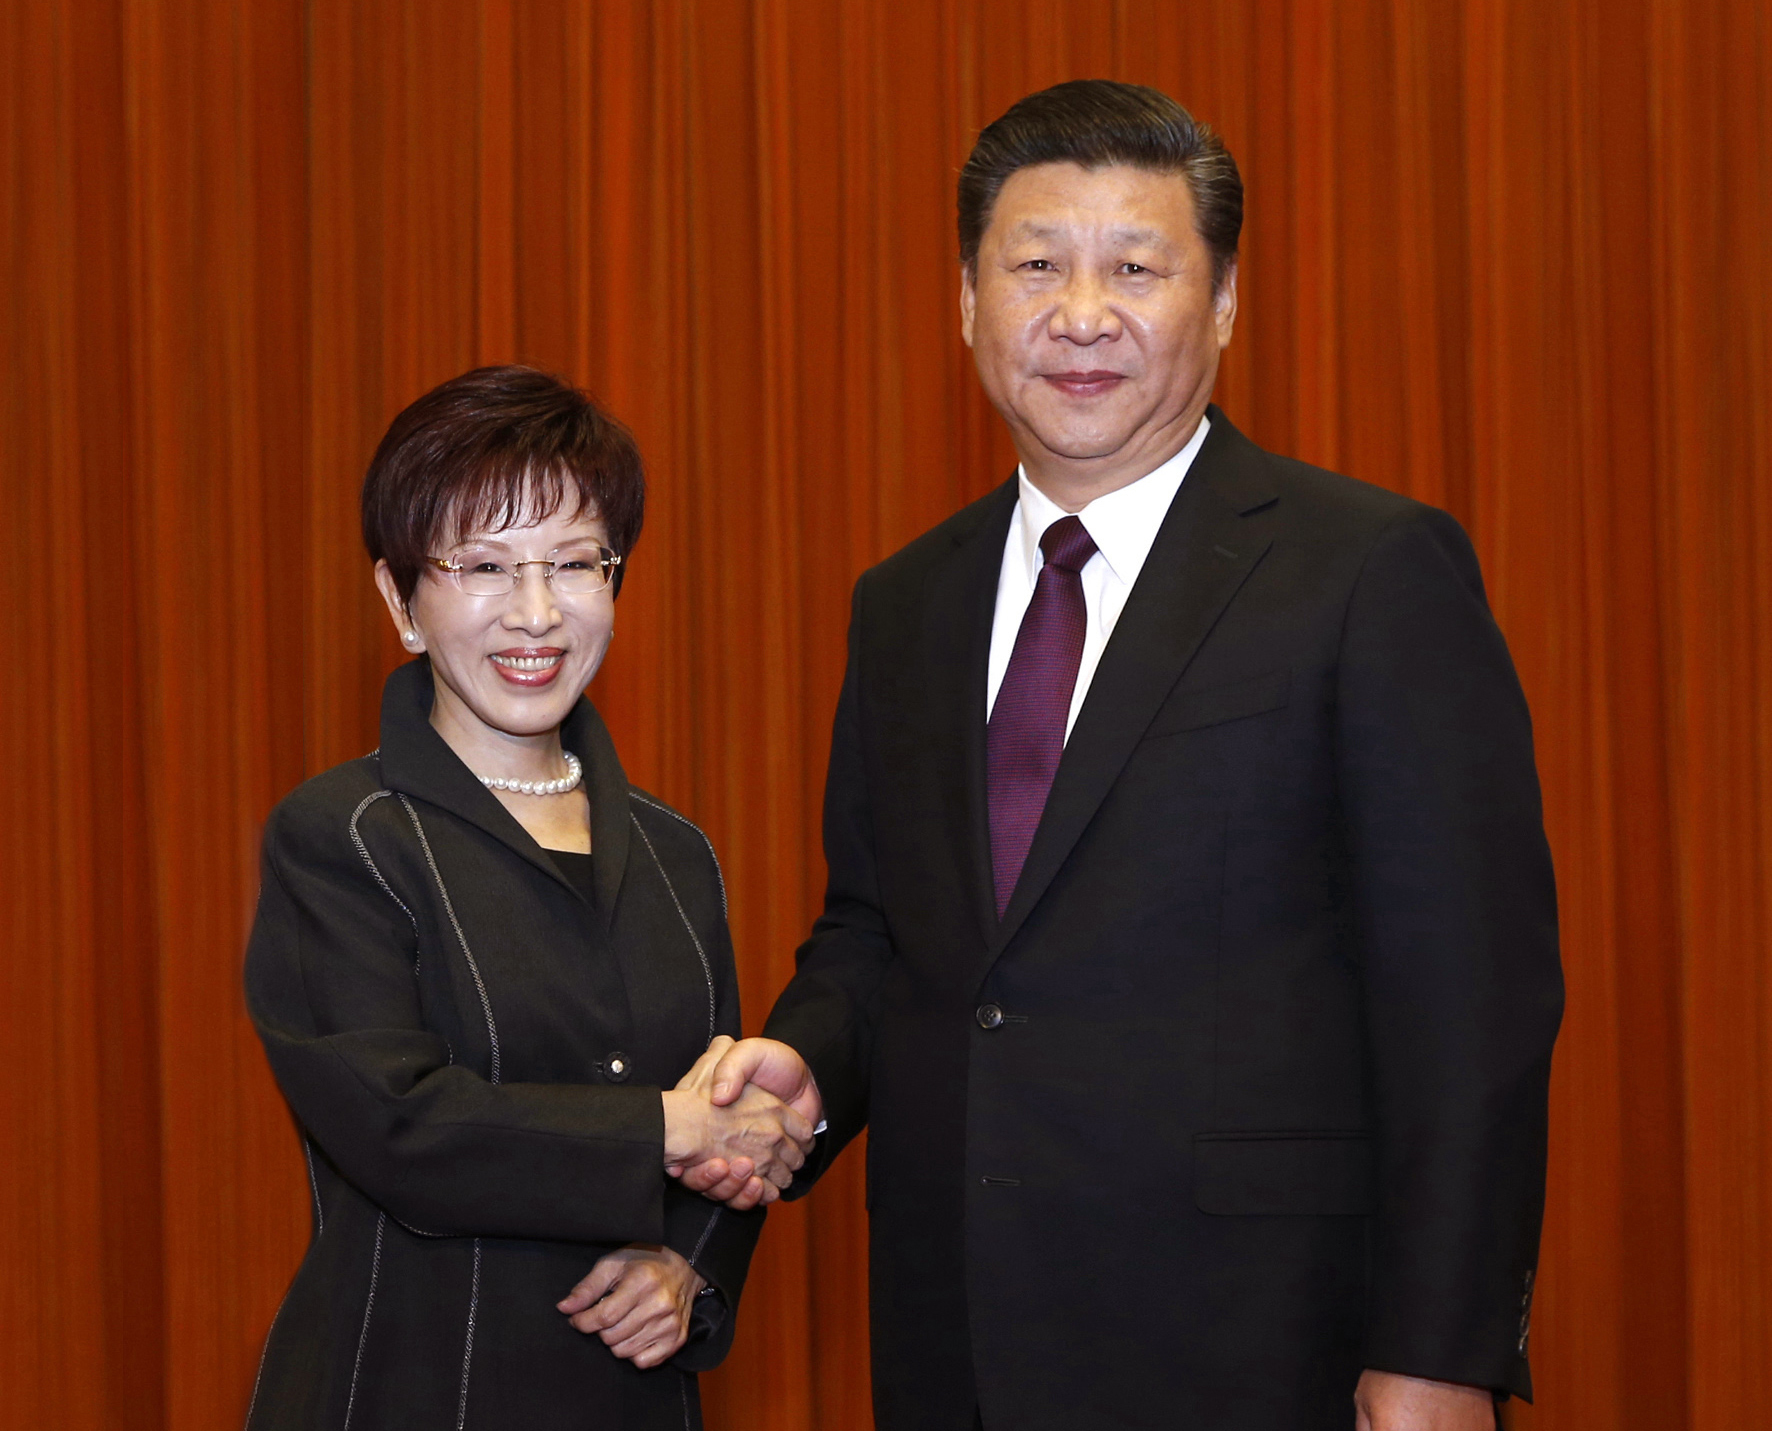 Chinese President Xi Jinping and Kuomintang Chairwoman Hung Hsiu-chu shake hands as they pose for photographers during a meeting at the Great Hall of the People in Beijing on Tuesday. | AP